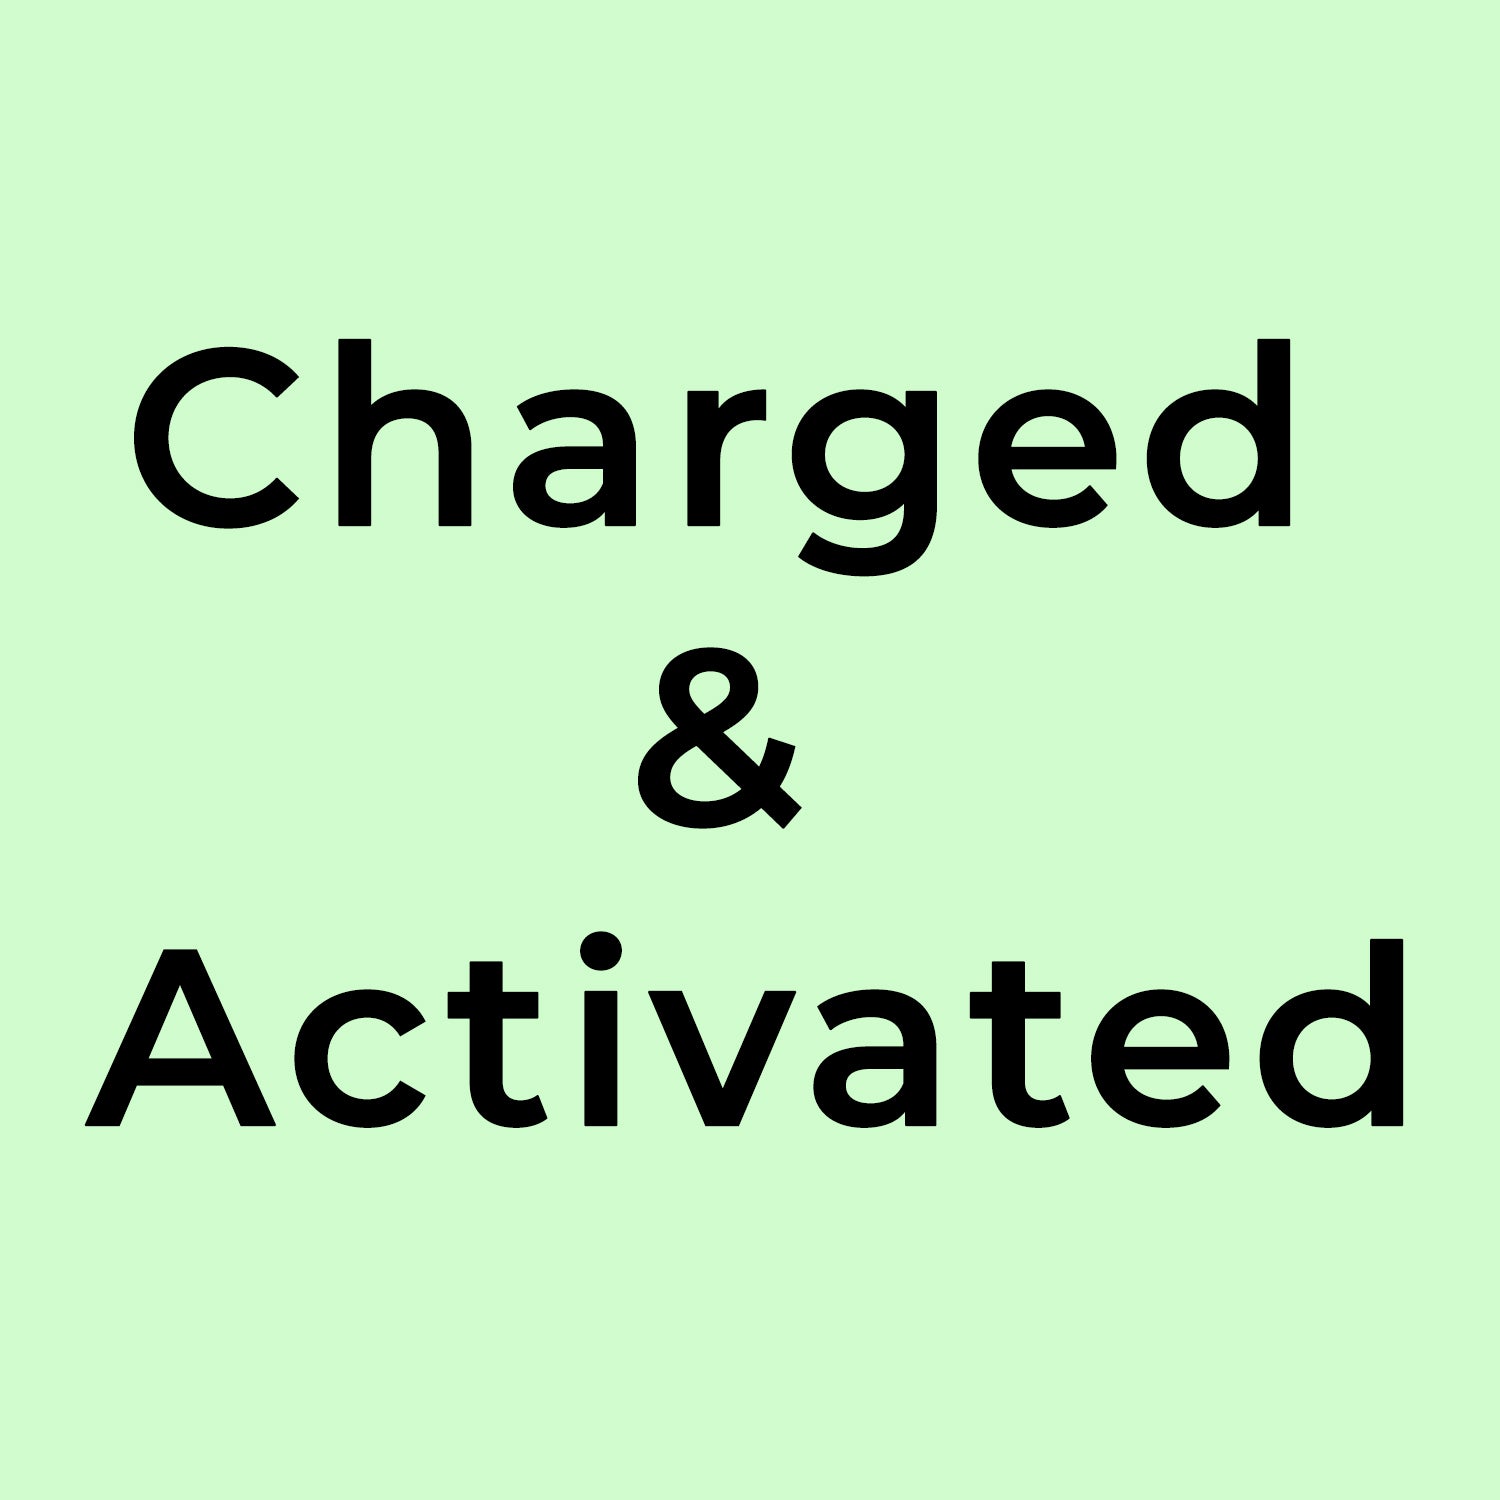 Charged & Activated